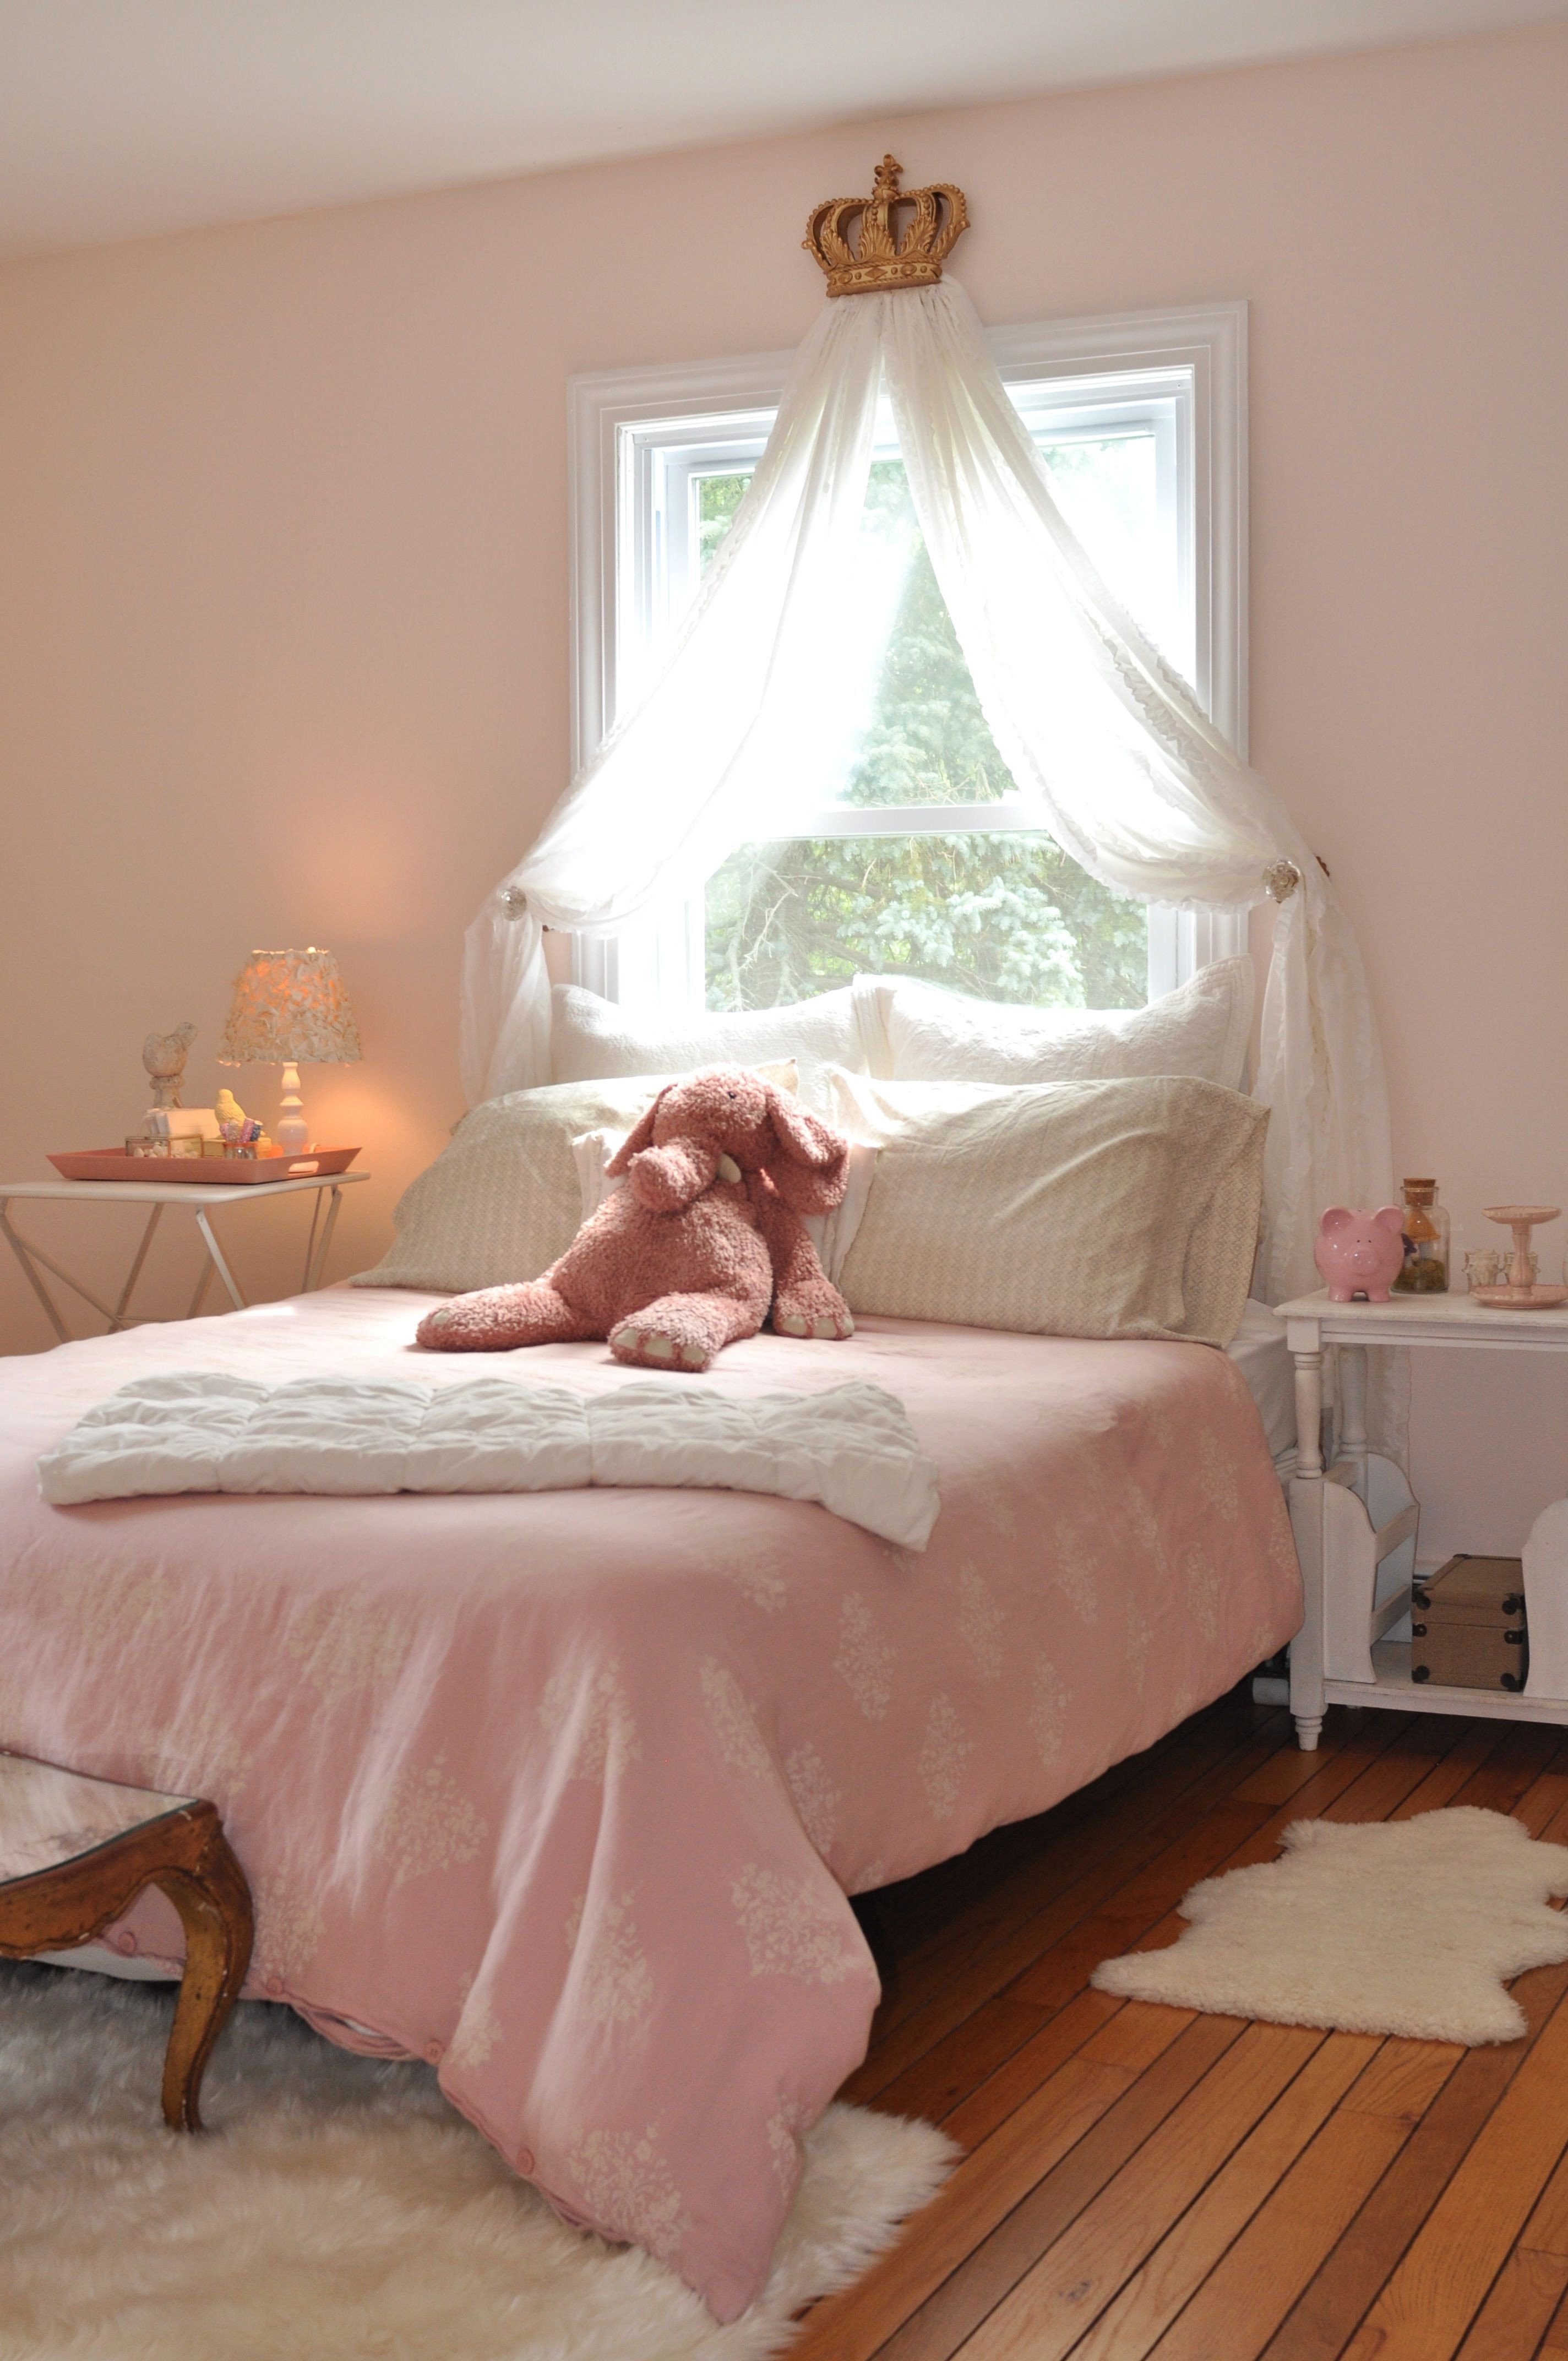 Girl Princess Bedroom Set Lovely Design the Perfect Magical Space Inspired by This Awesome